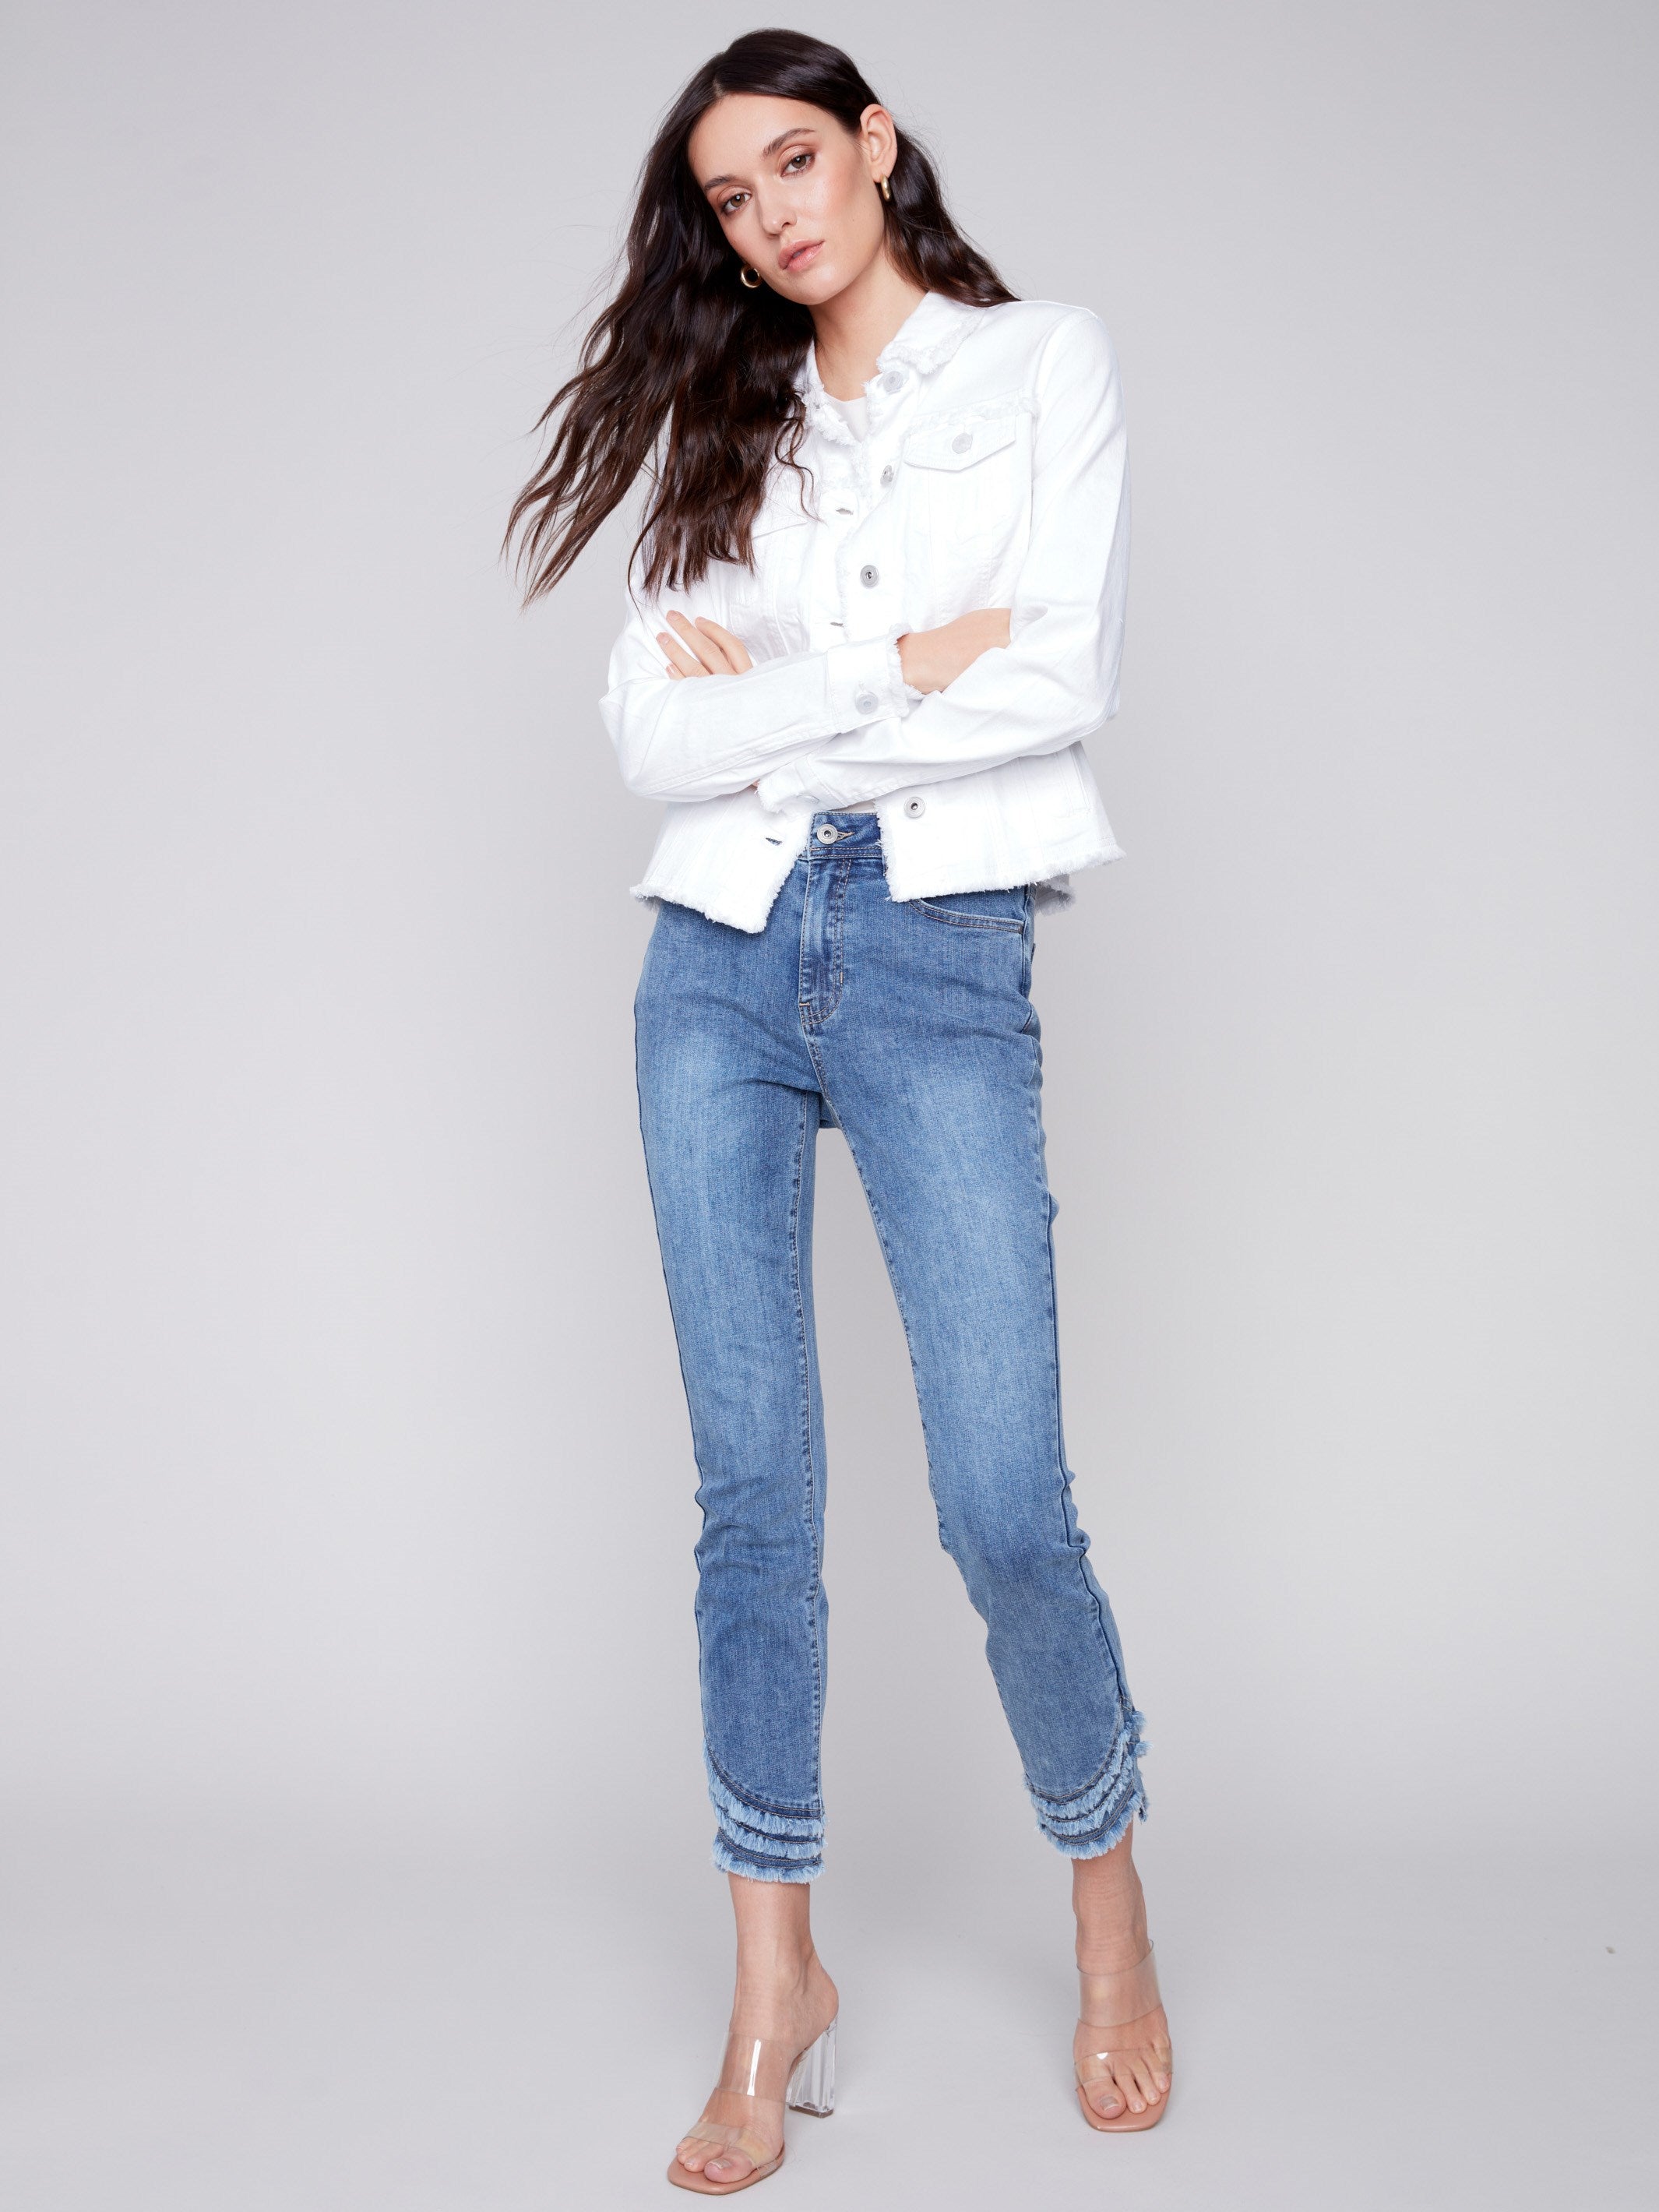 Twill Jean Jacket with Frayed Edges - White